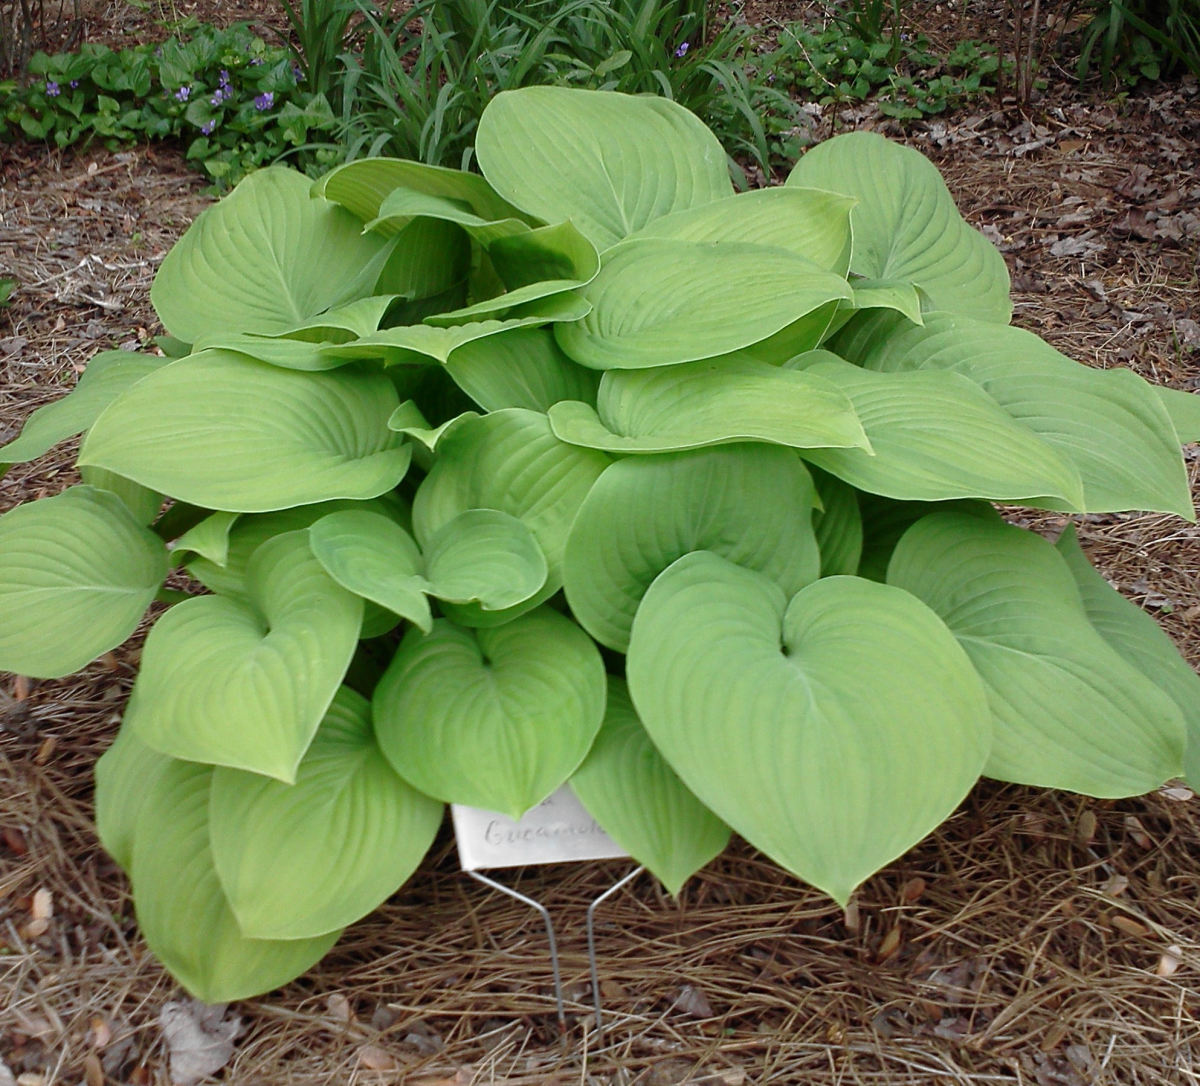 This is a hosta called "Guacamole". I had problems growing hosta in central Florida, but now that we're a bit farther north, I will be trying them again.